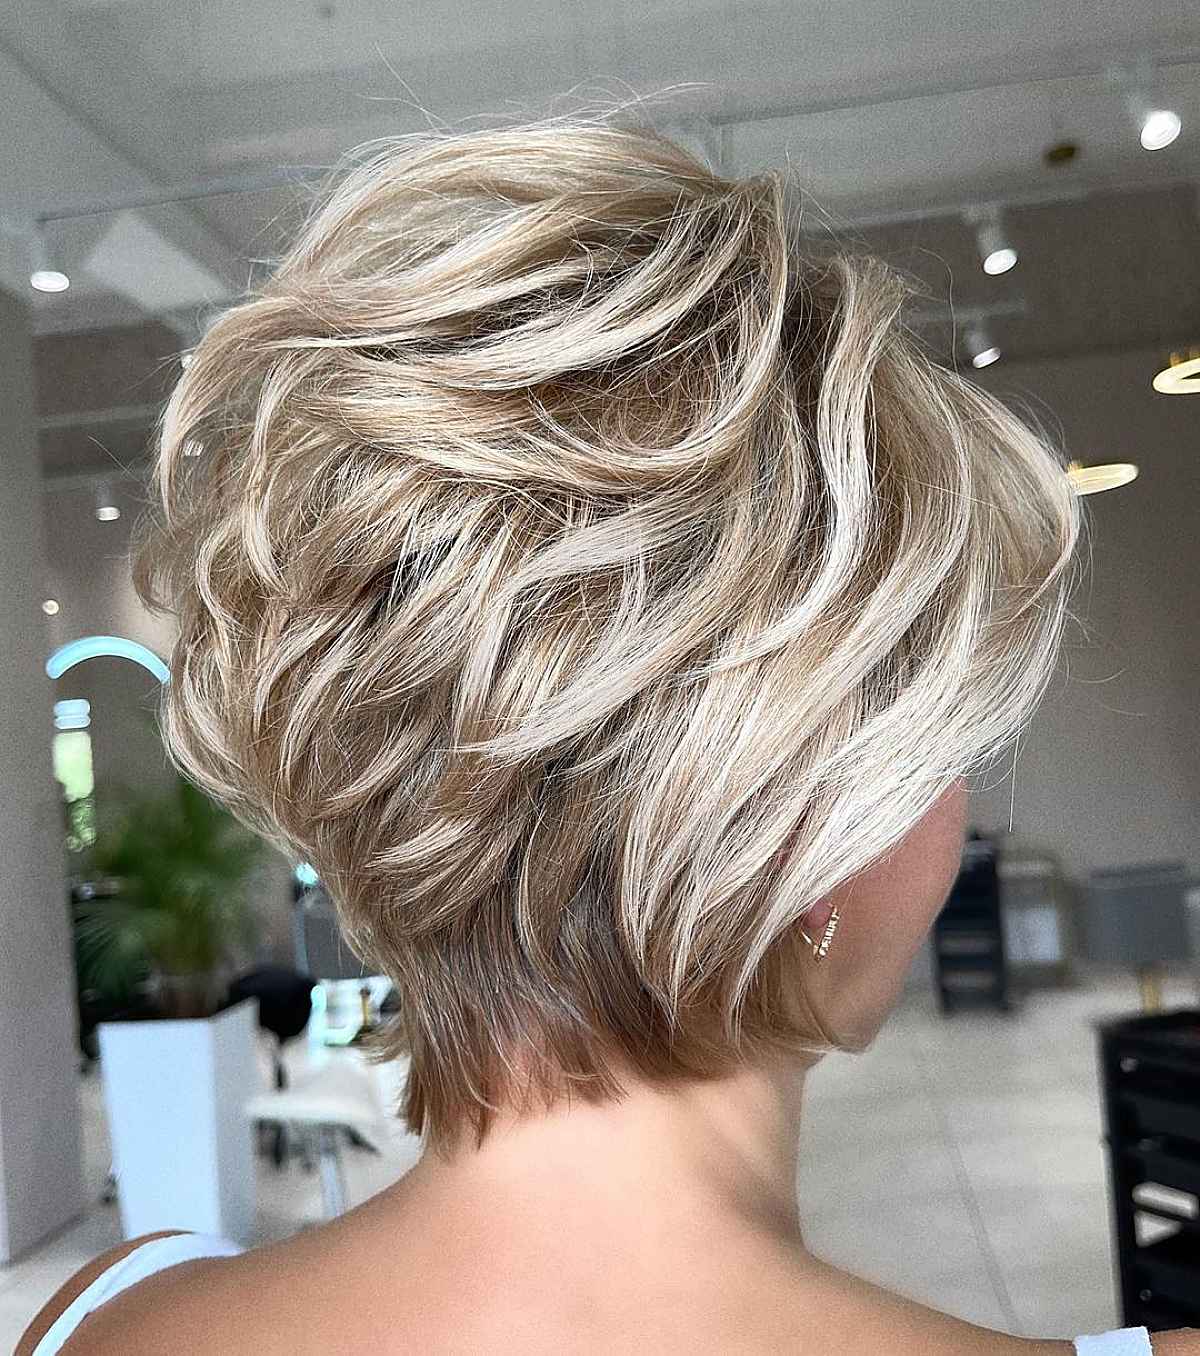 Feathered Pixie Cut with Layers